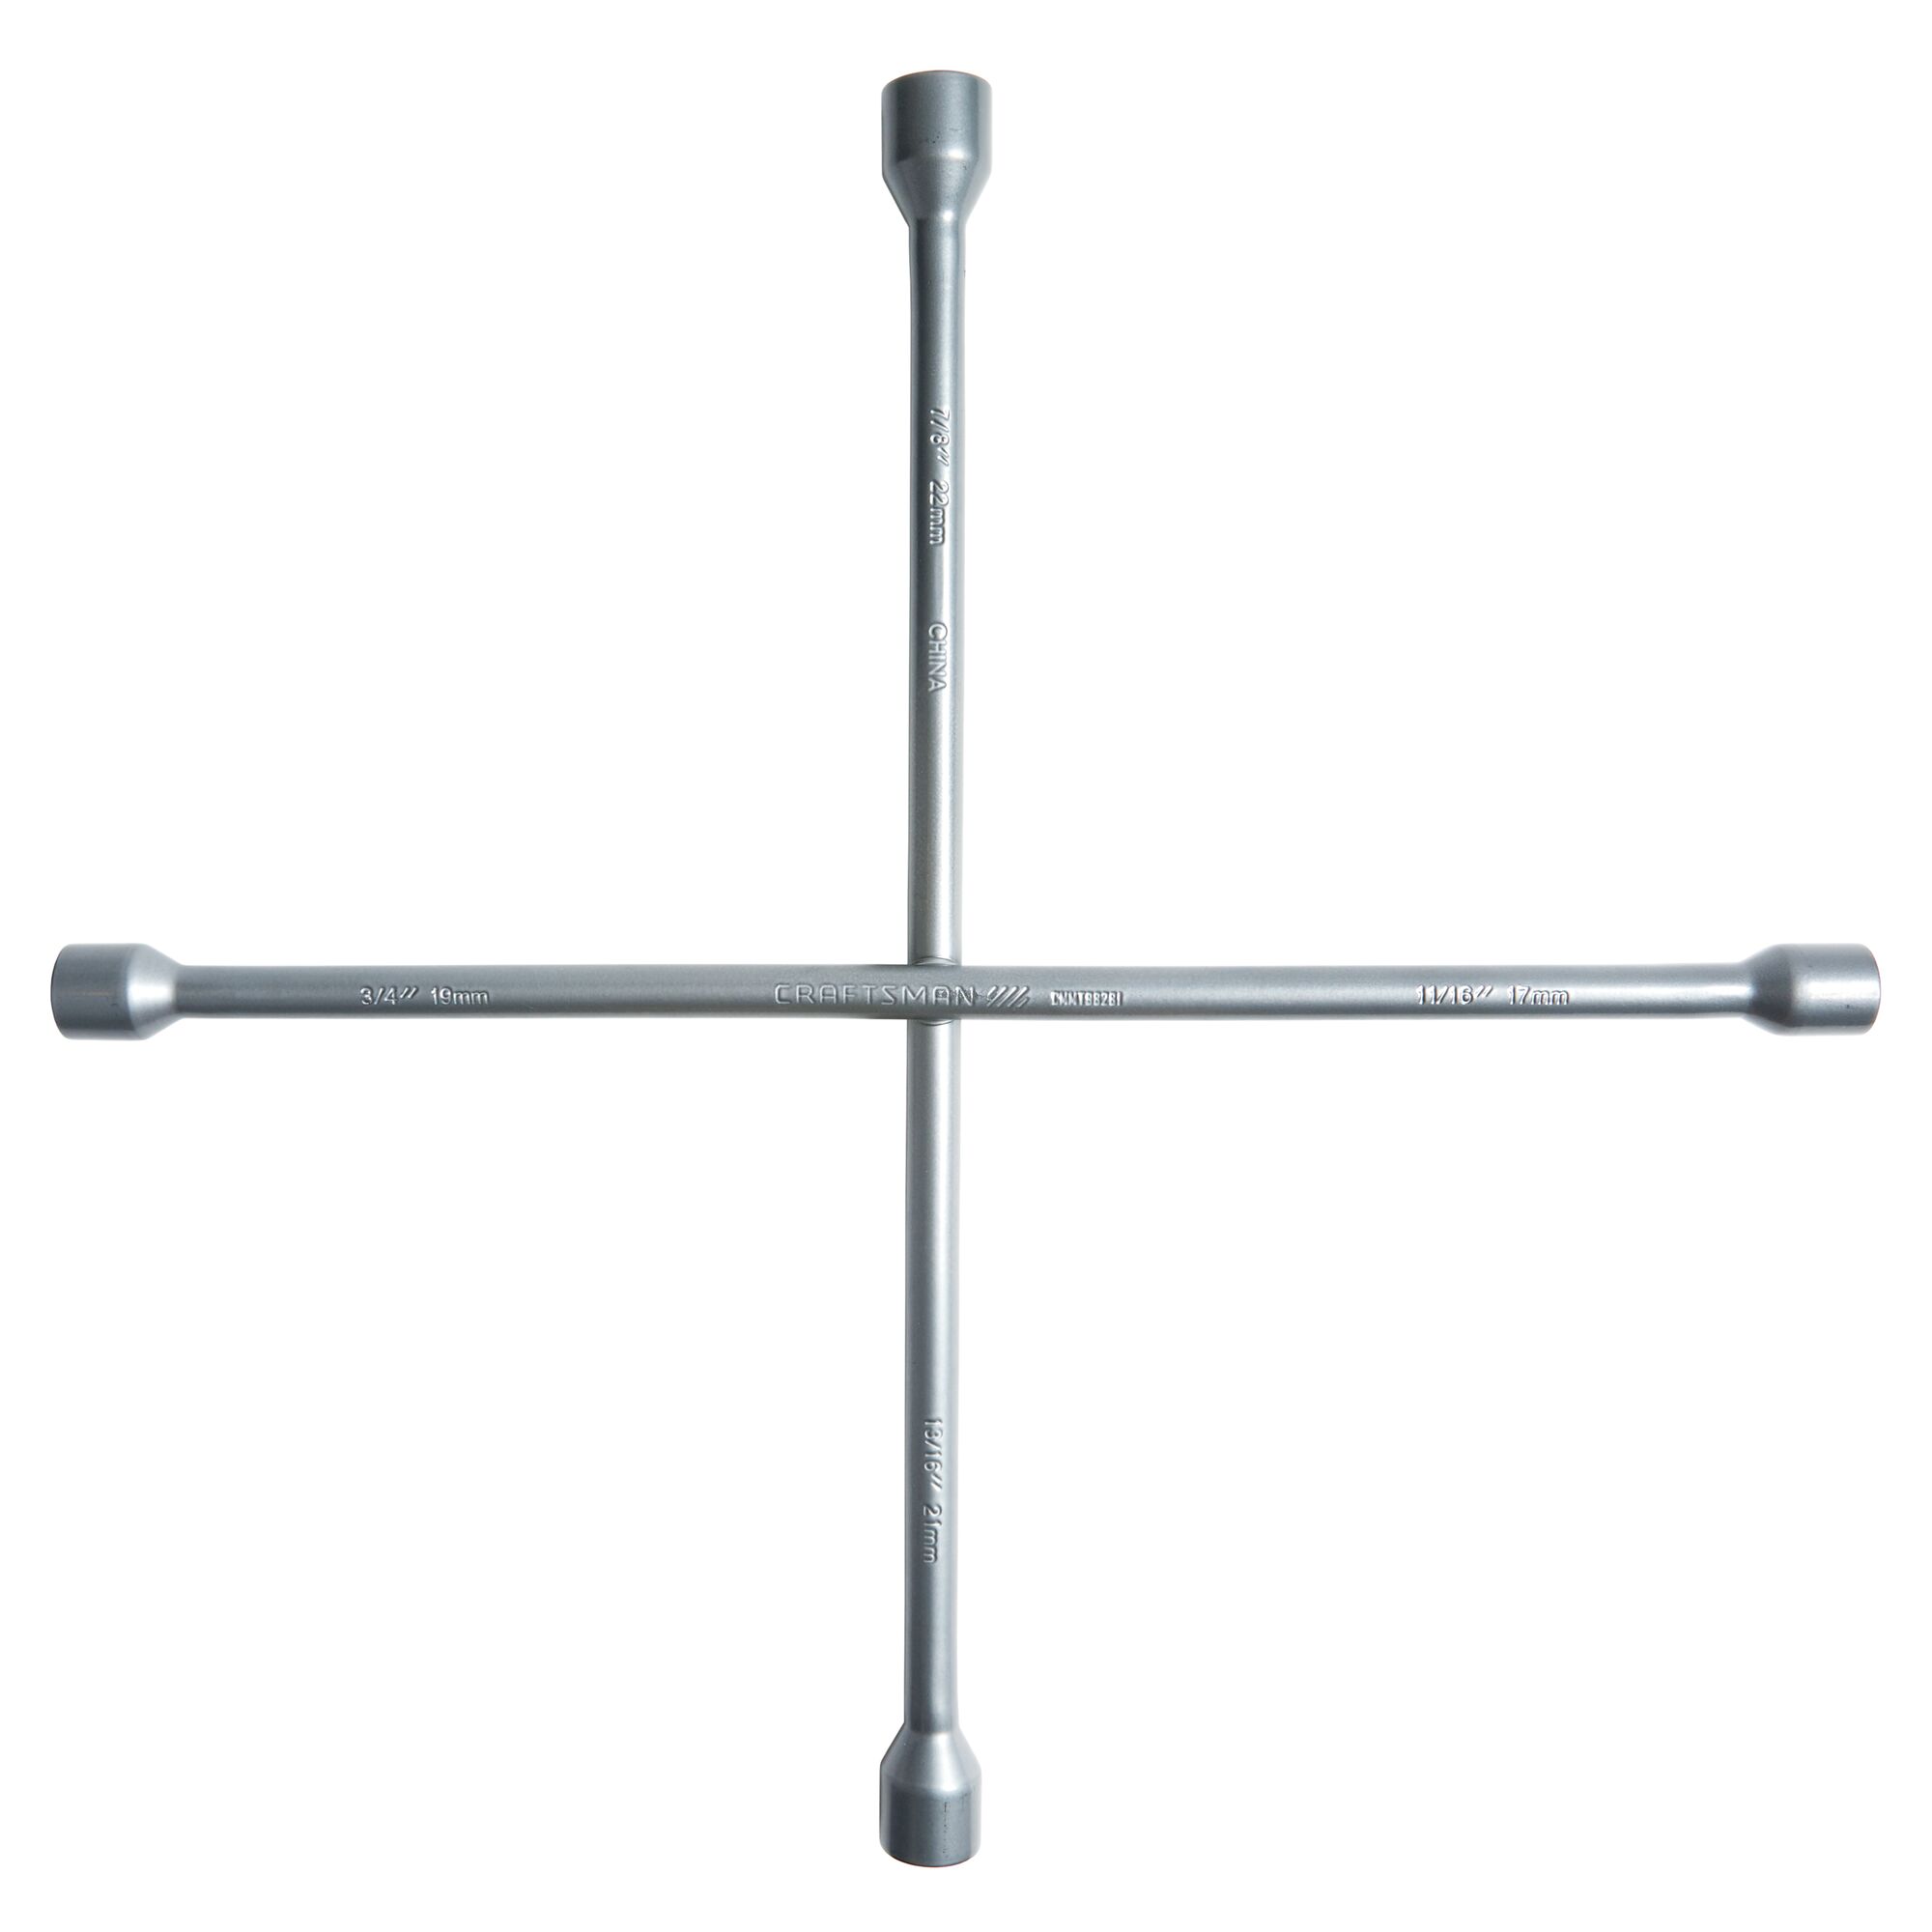 CRAFTSMAN Automotive Fixed Cross Bar in the Automotive Hand Tools